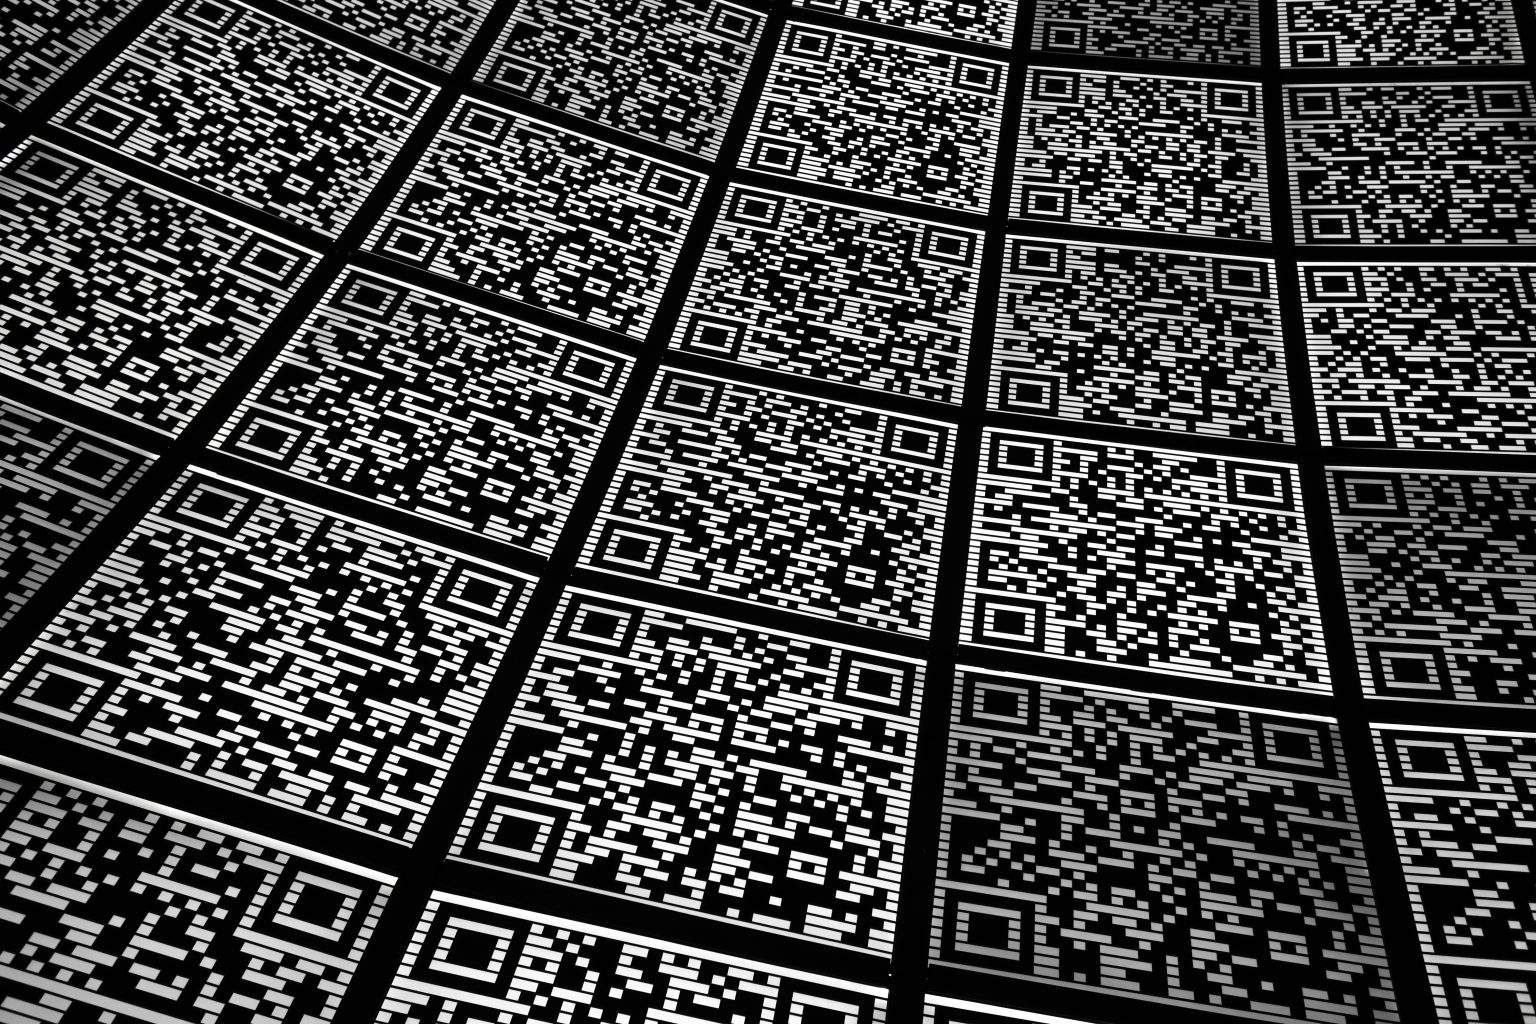 QR Codes: A Waste of Space